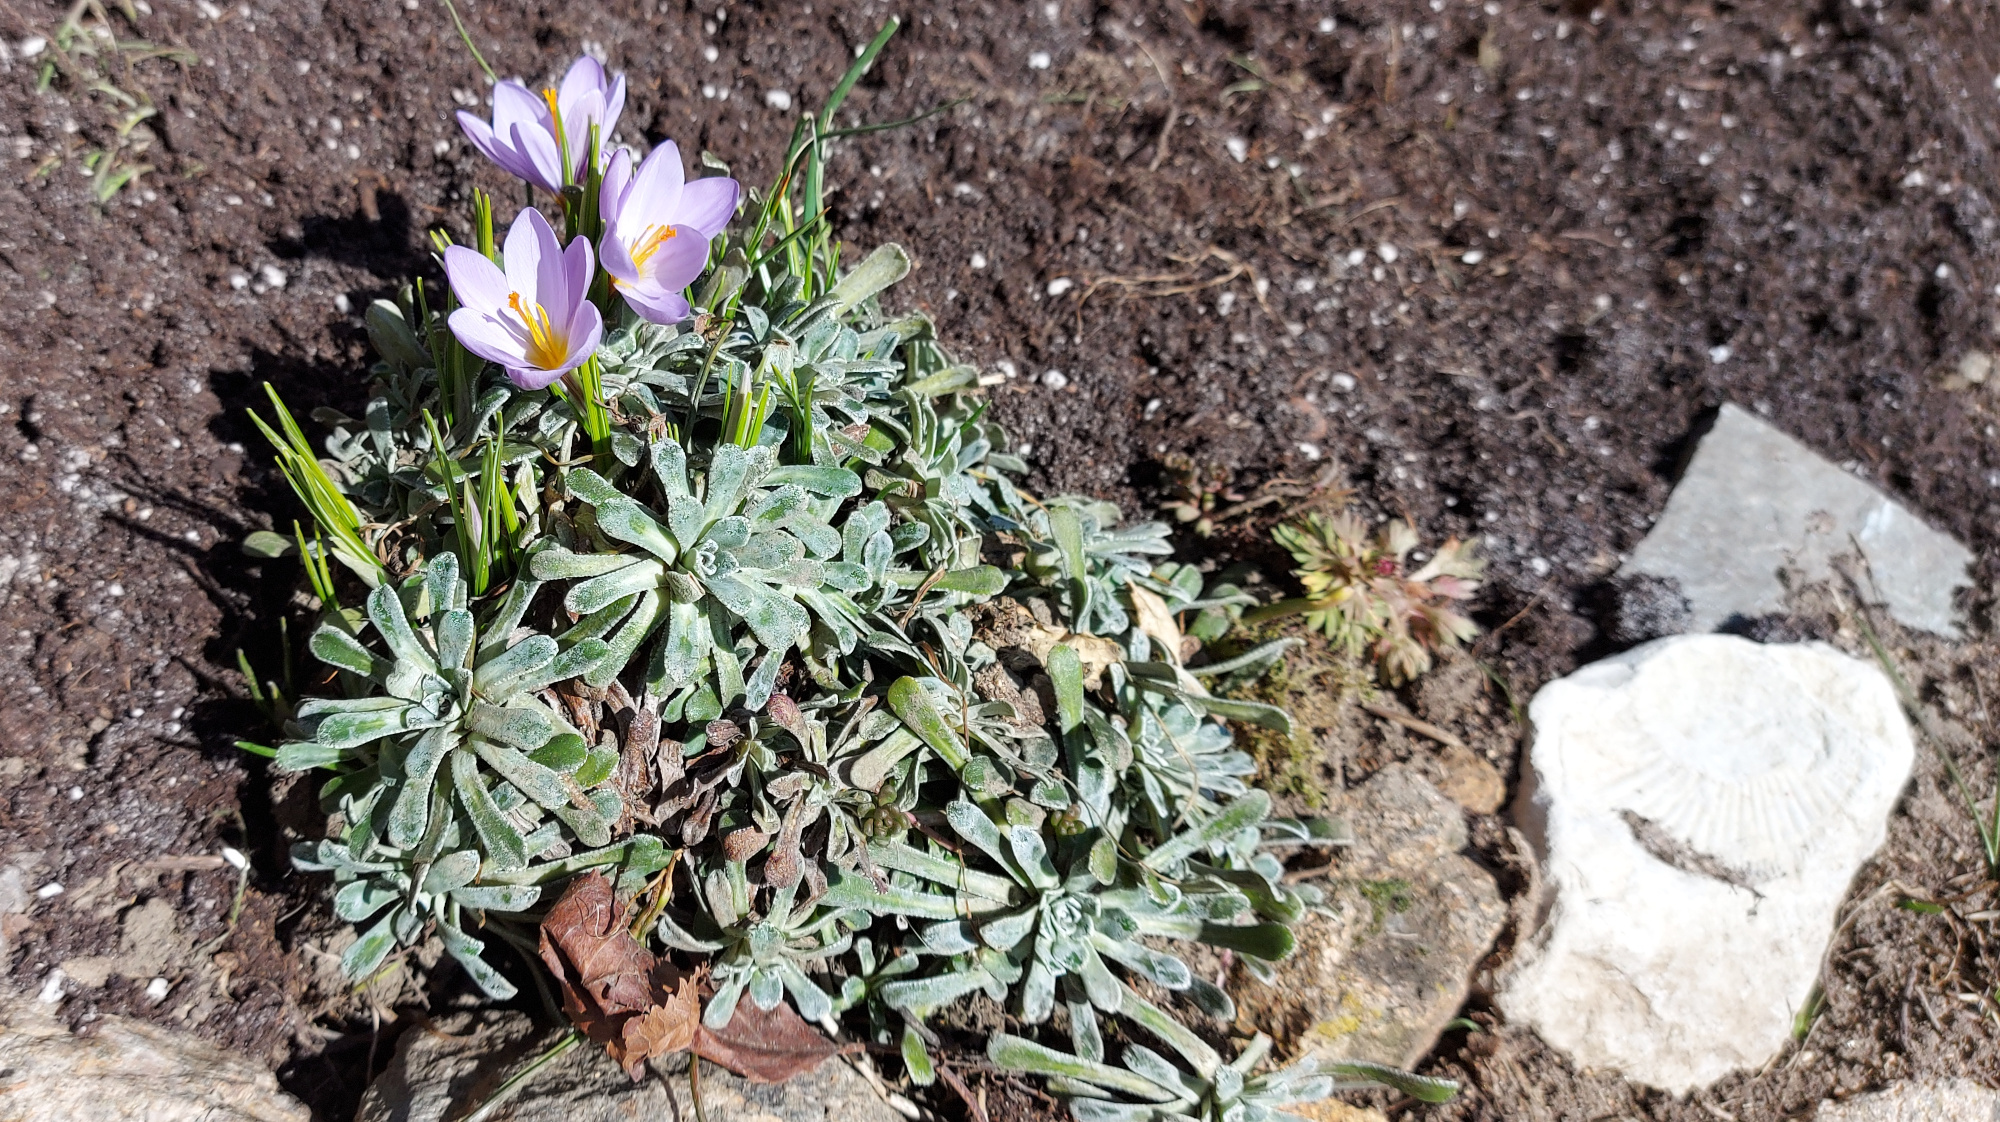 Flowering crocus and fossilized shell